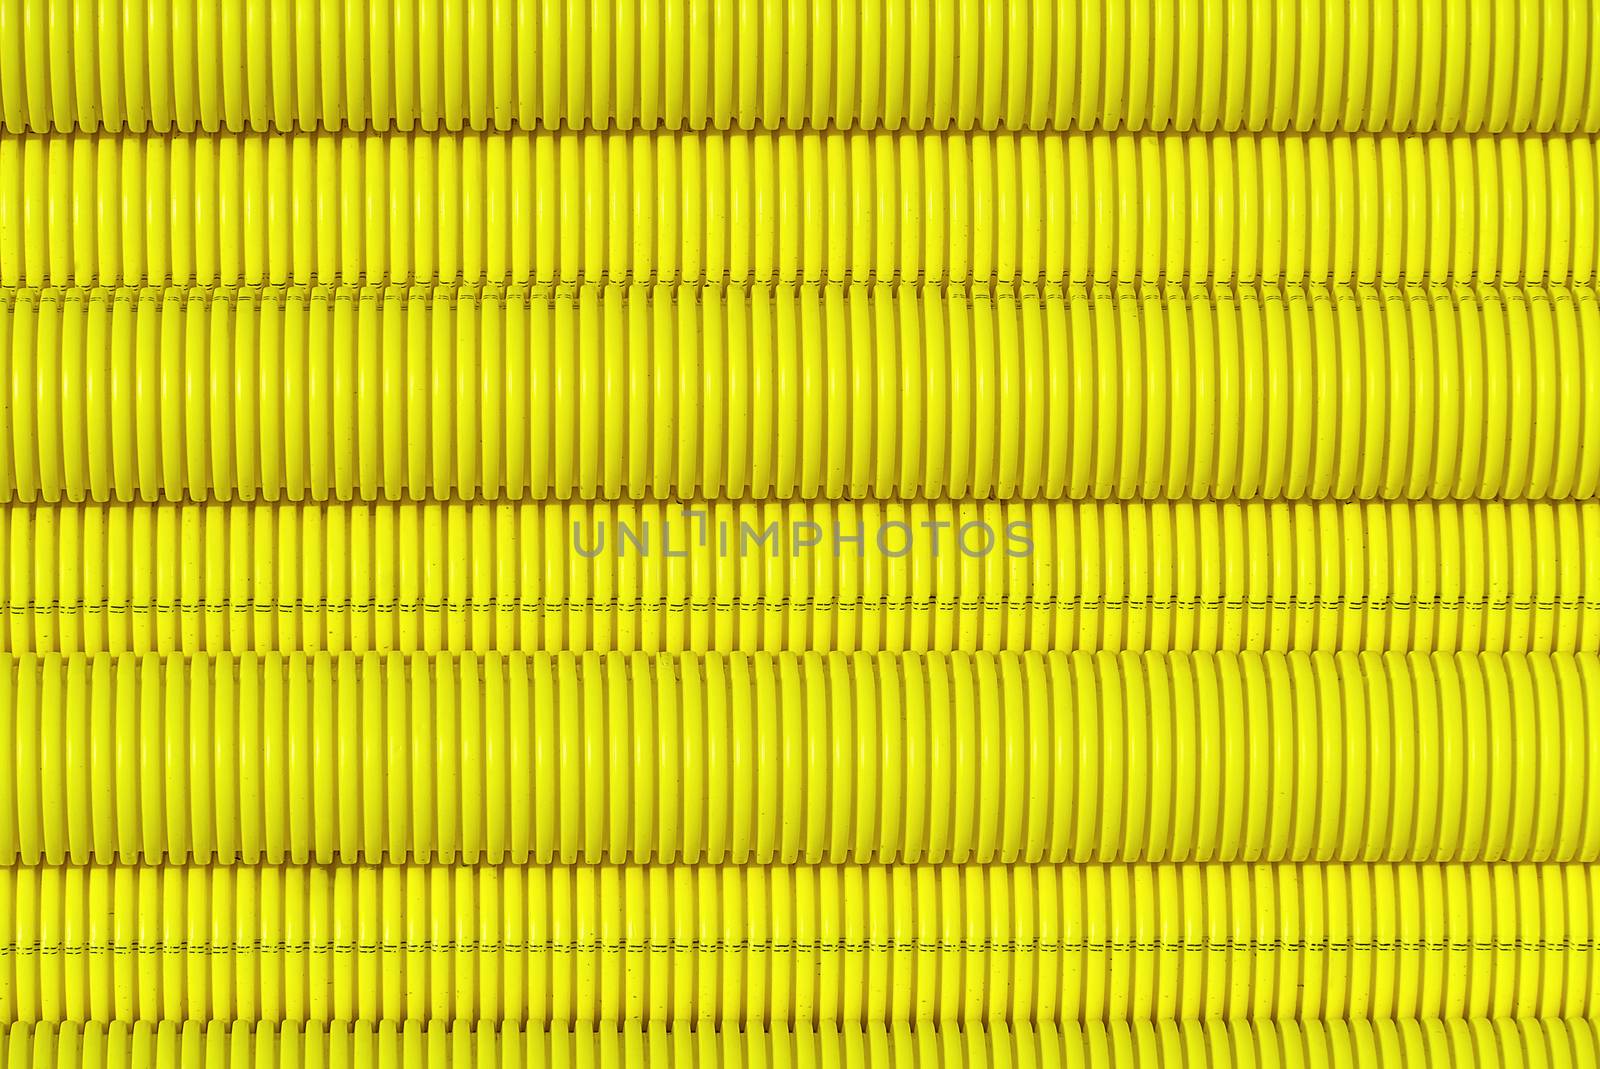 yellow plastic pipes for laying electricity cables underground. texture or abstract background